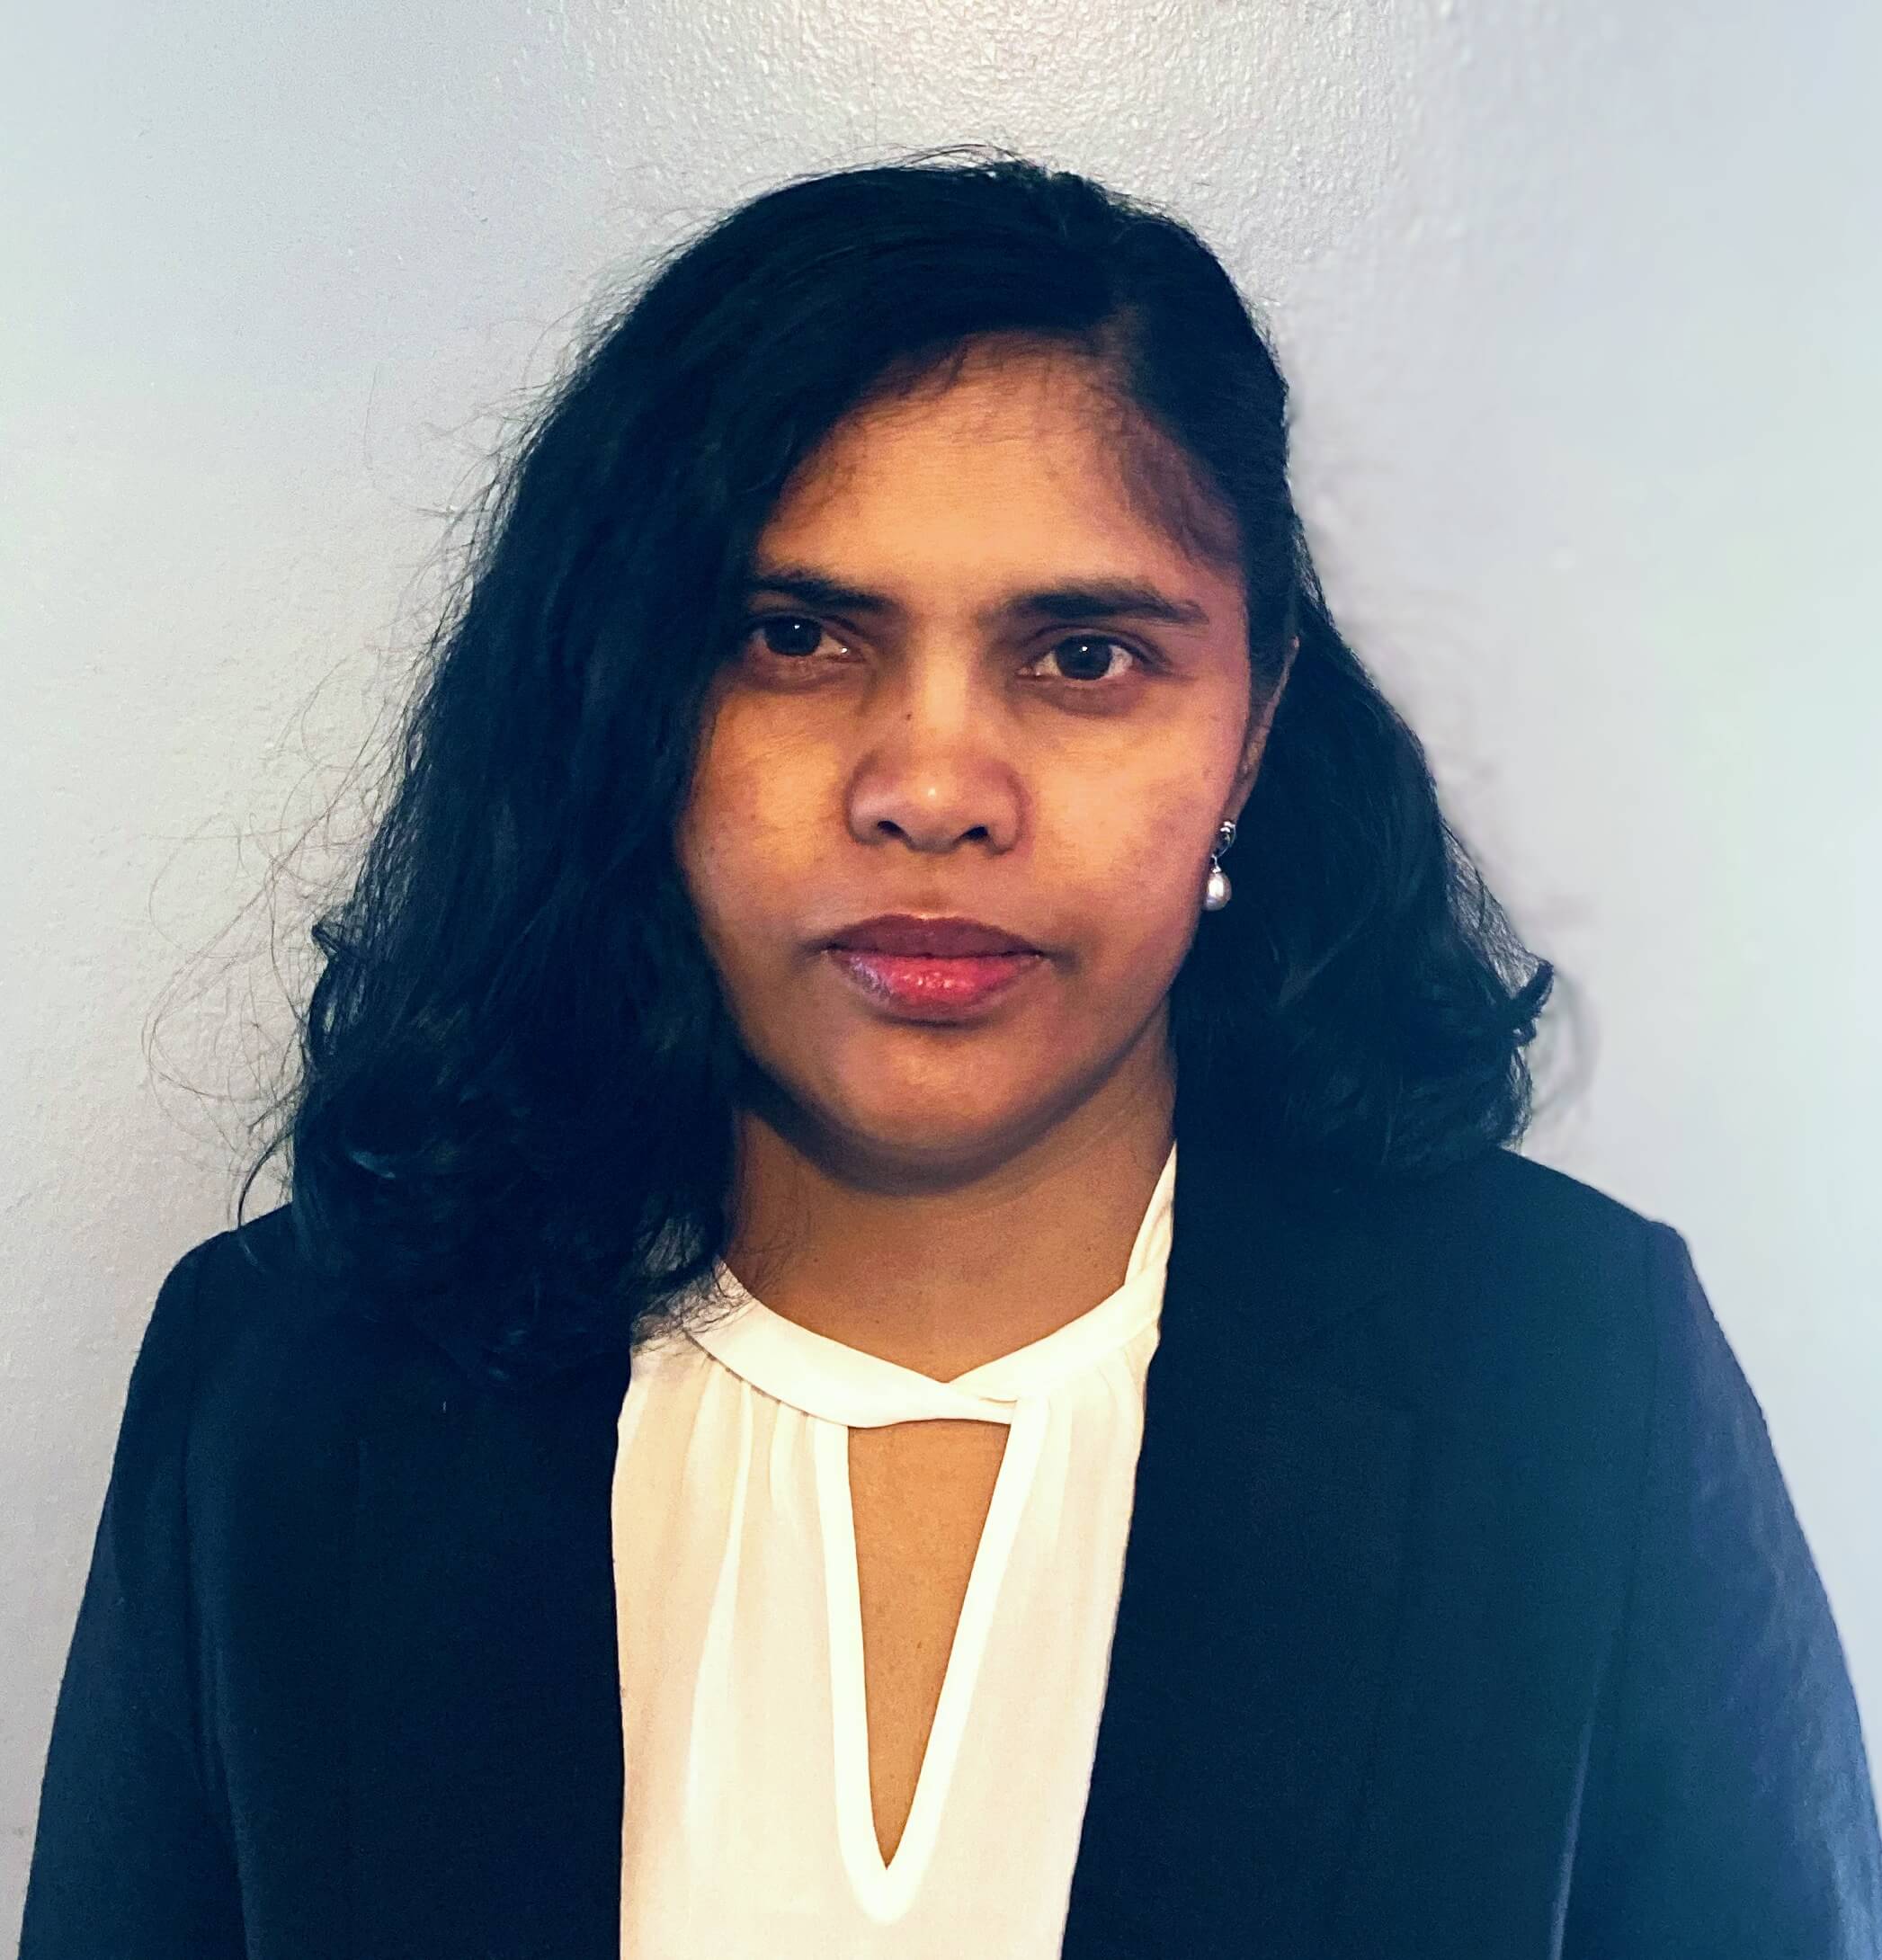 Image of Zenie M. Persaud, QCC Commencement 2021